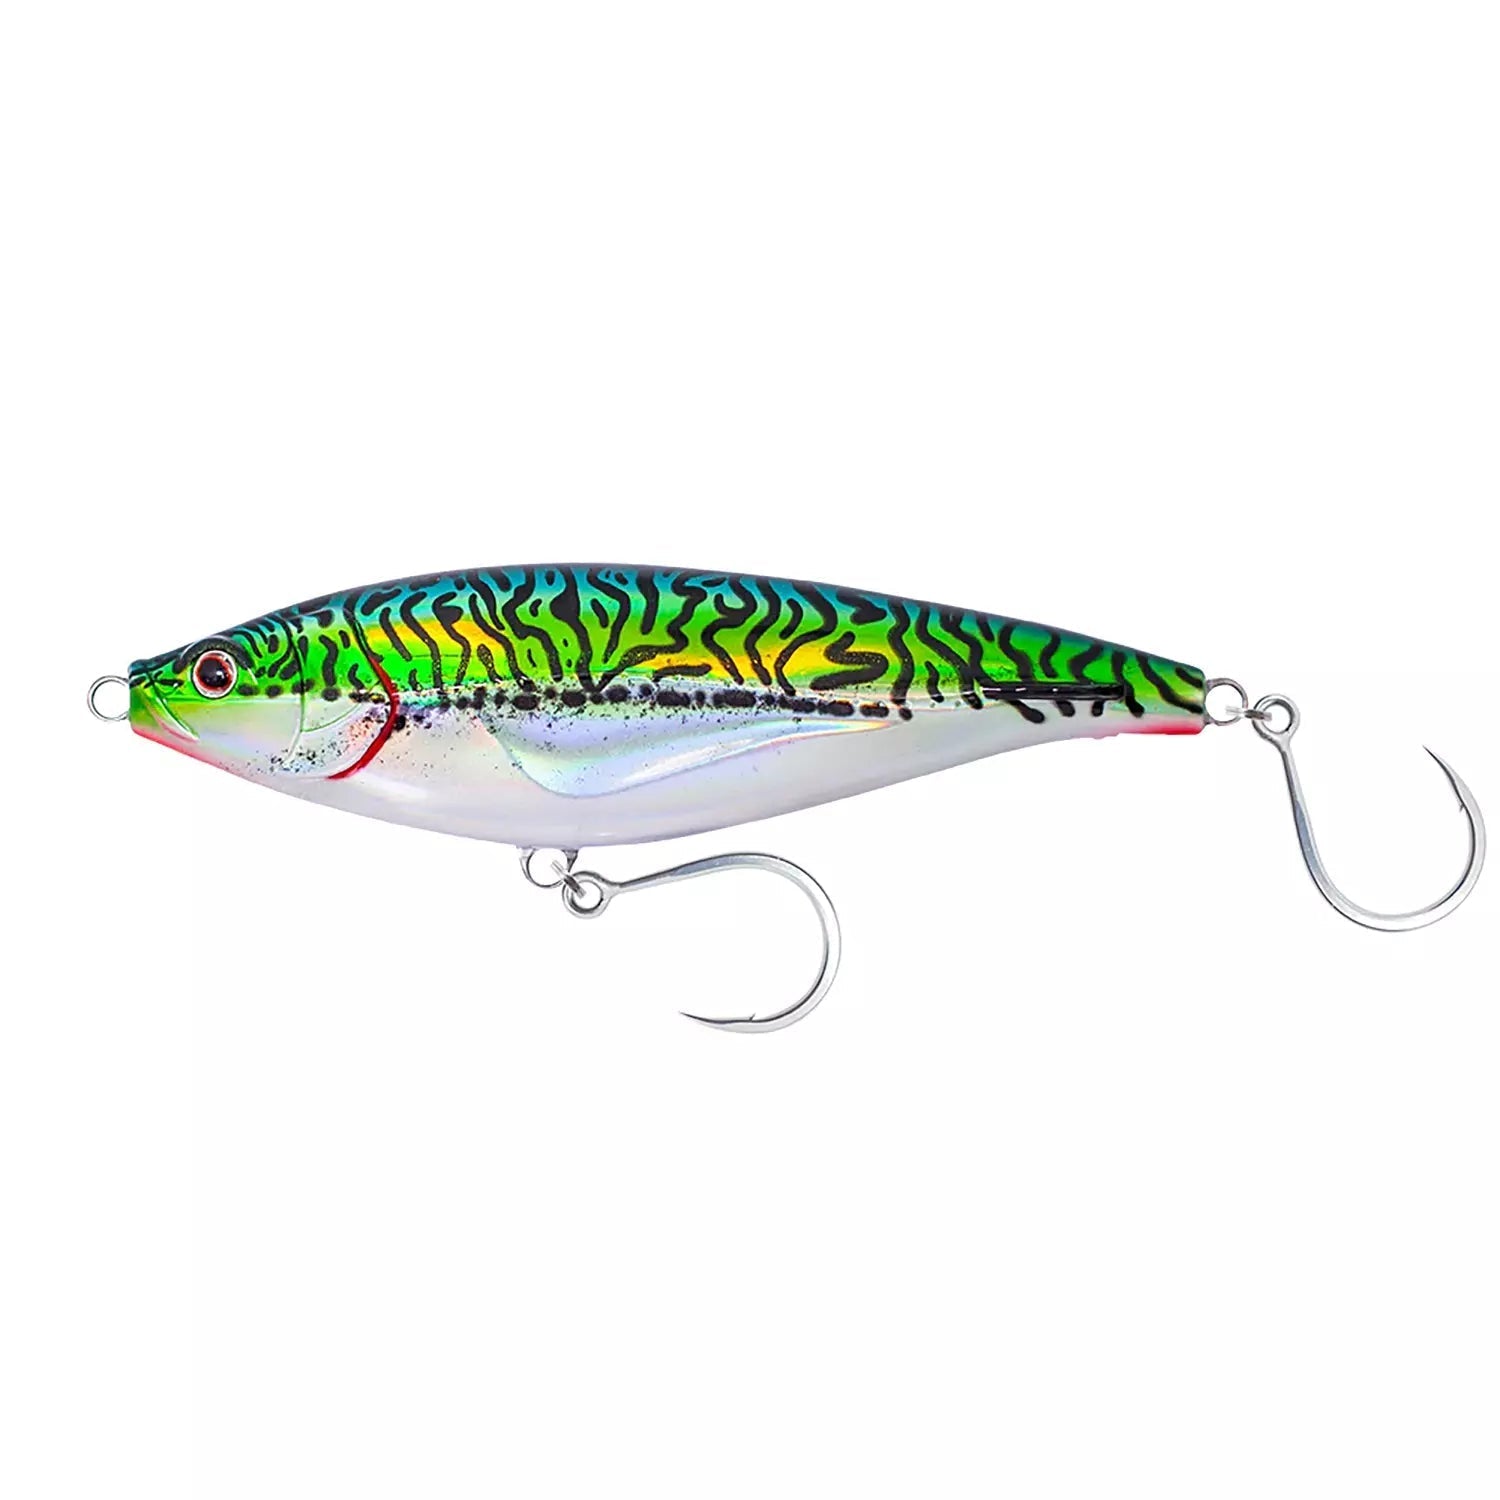 Nomad Design Madscad-Lure - Poppers, Stickbaits & Pencils-Nomad-190mm-Silver Green Mackerel-Fishing Station